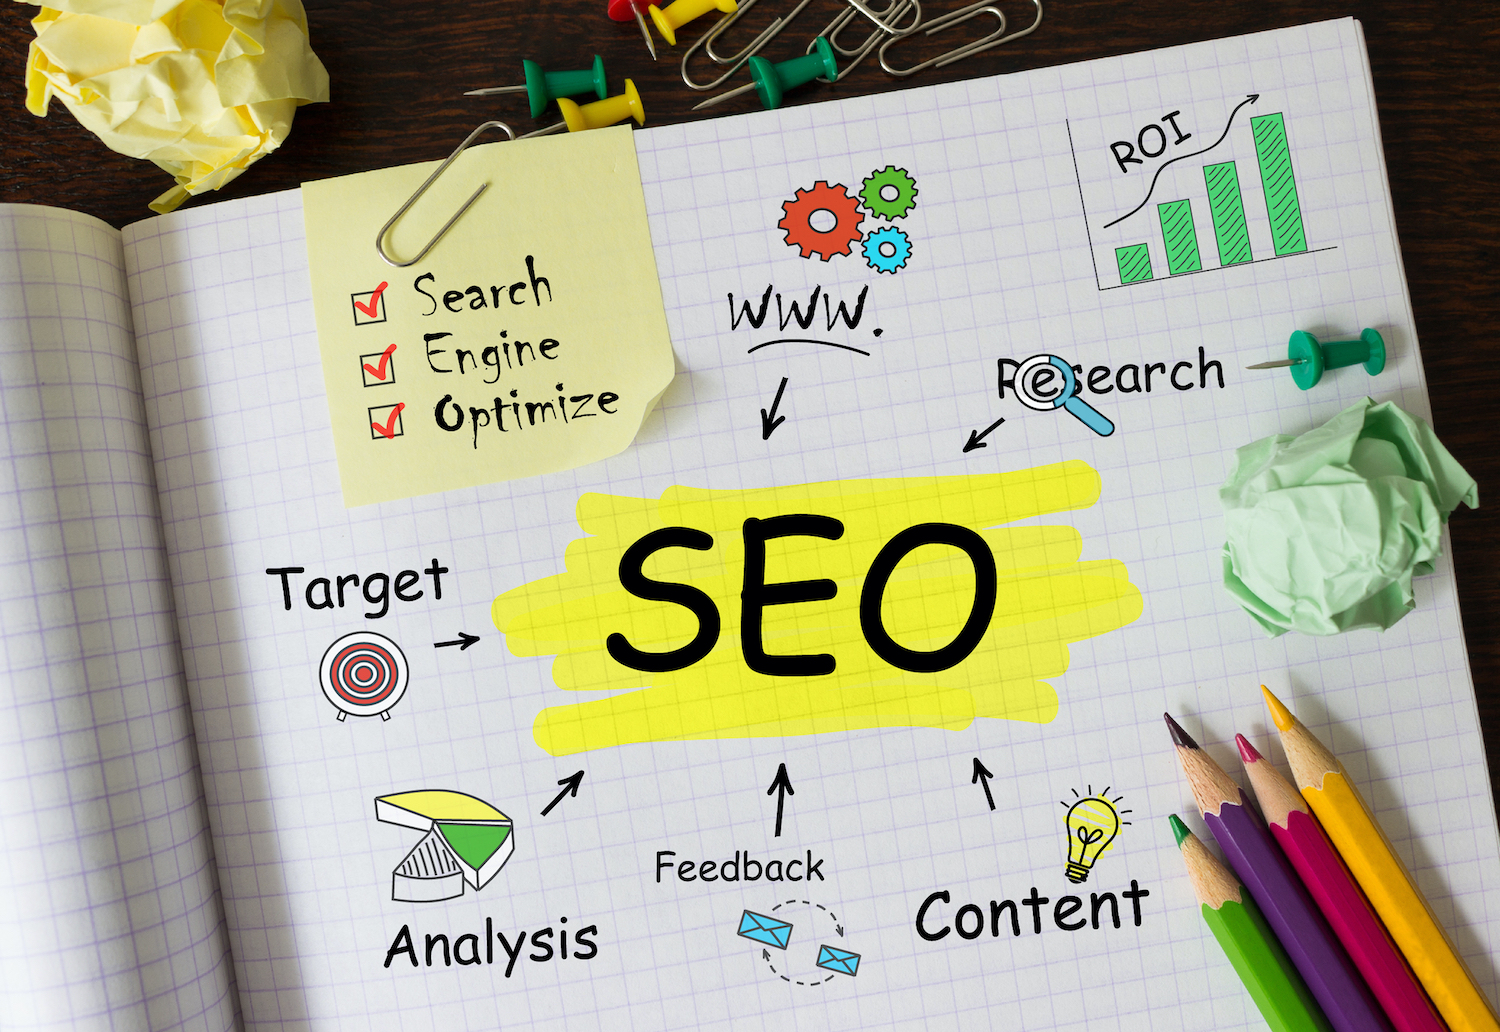 Planning SEO strategy, including research, targeted keywords, analysis, feedback, and content